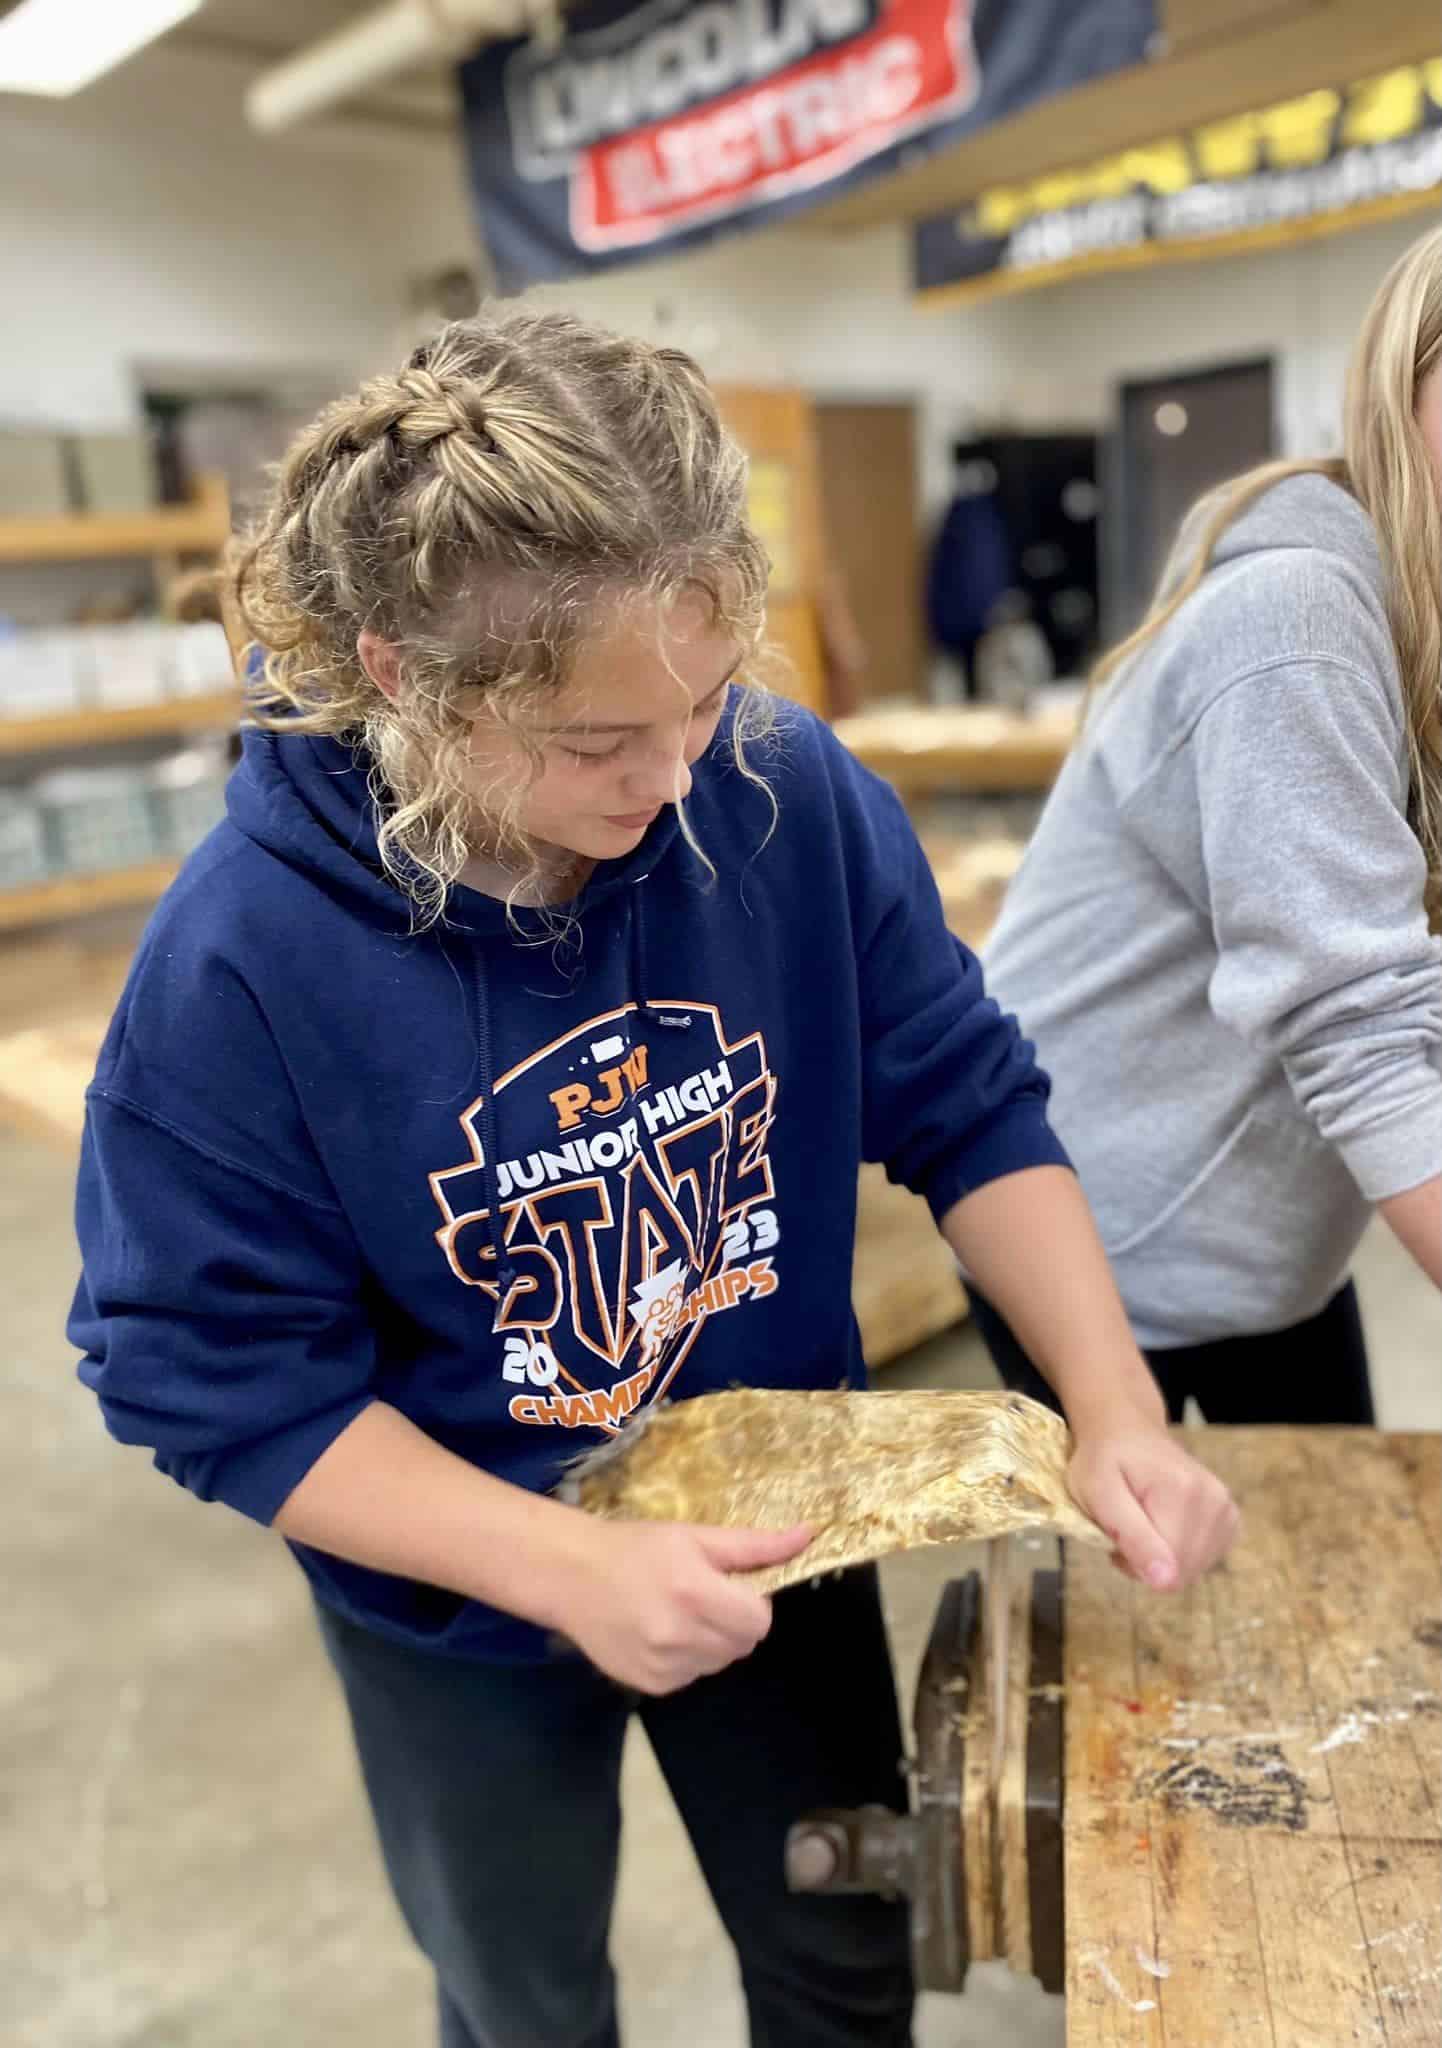 After applying treatments, Athens Middle School FFA members work their hides until the finished product is ready to be taken home.